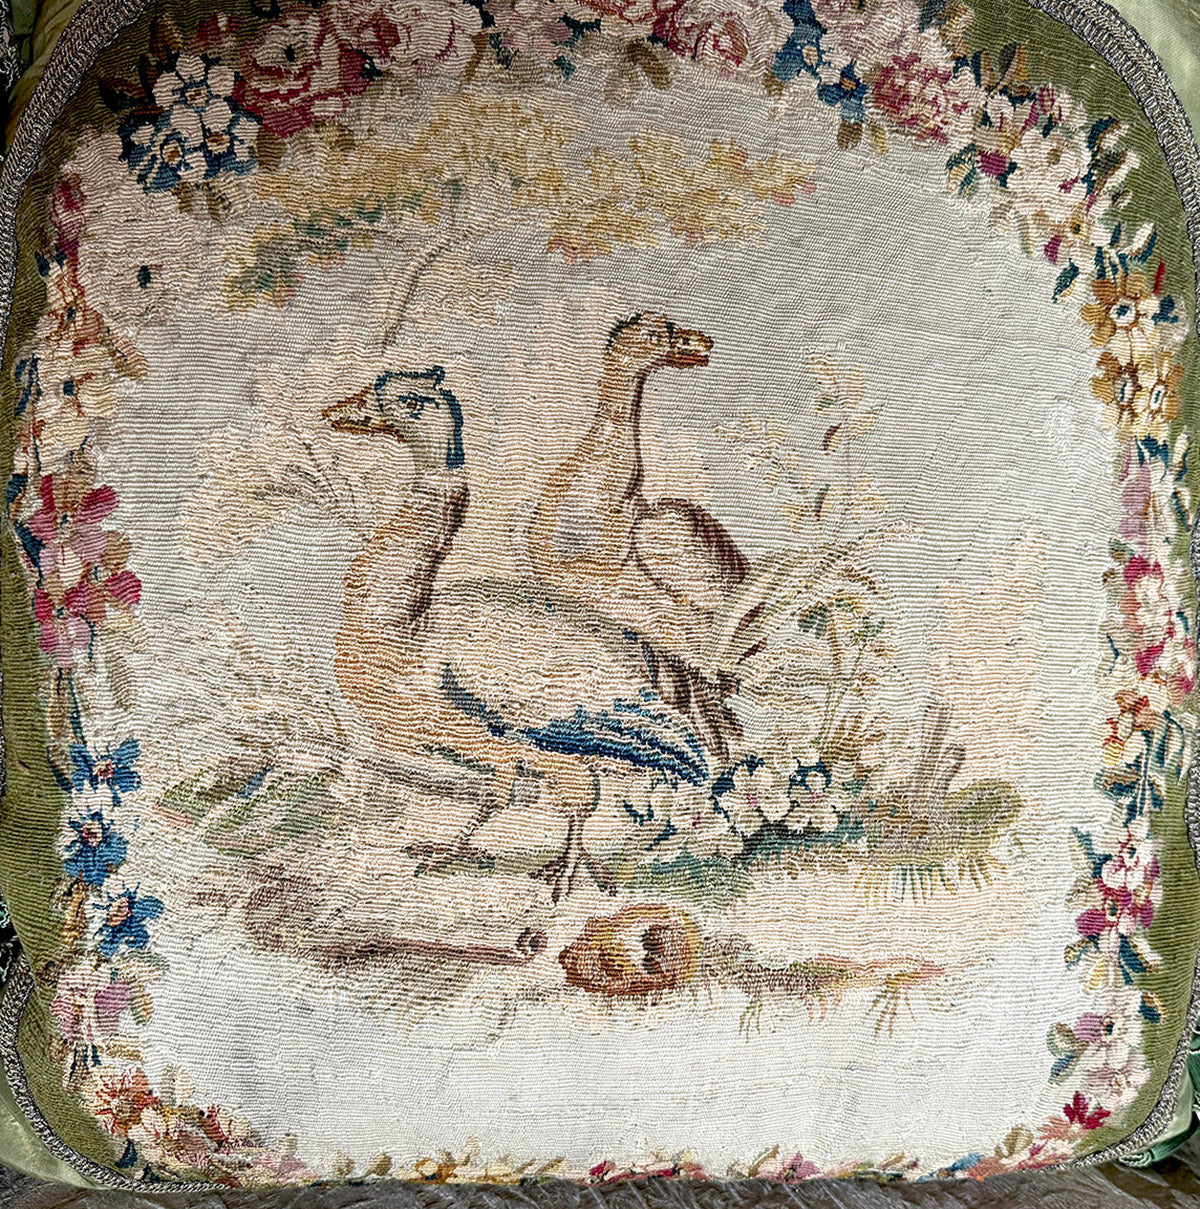 Opulent Large Antique 18th Century French Aubusson Tapestry Pillow #4, Ducks, 27" x 27" + Fringe